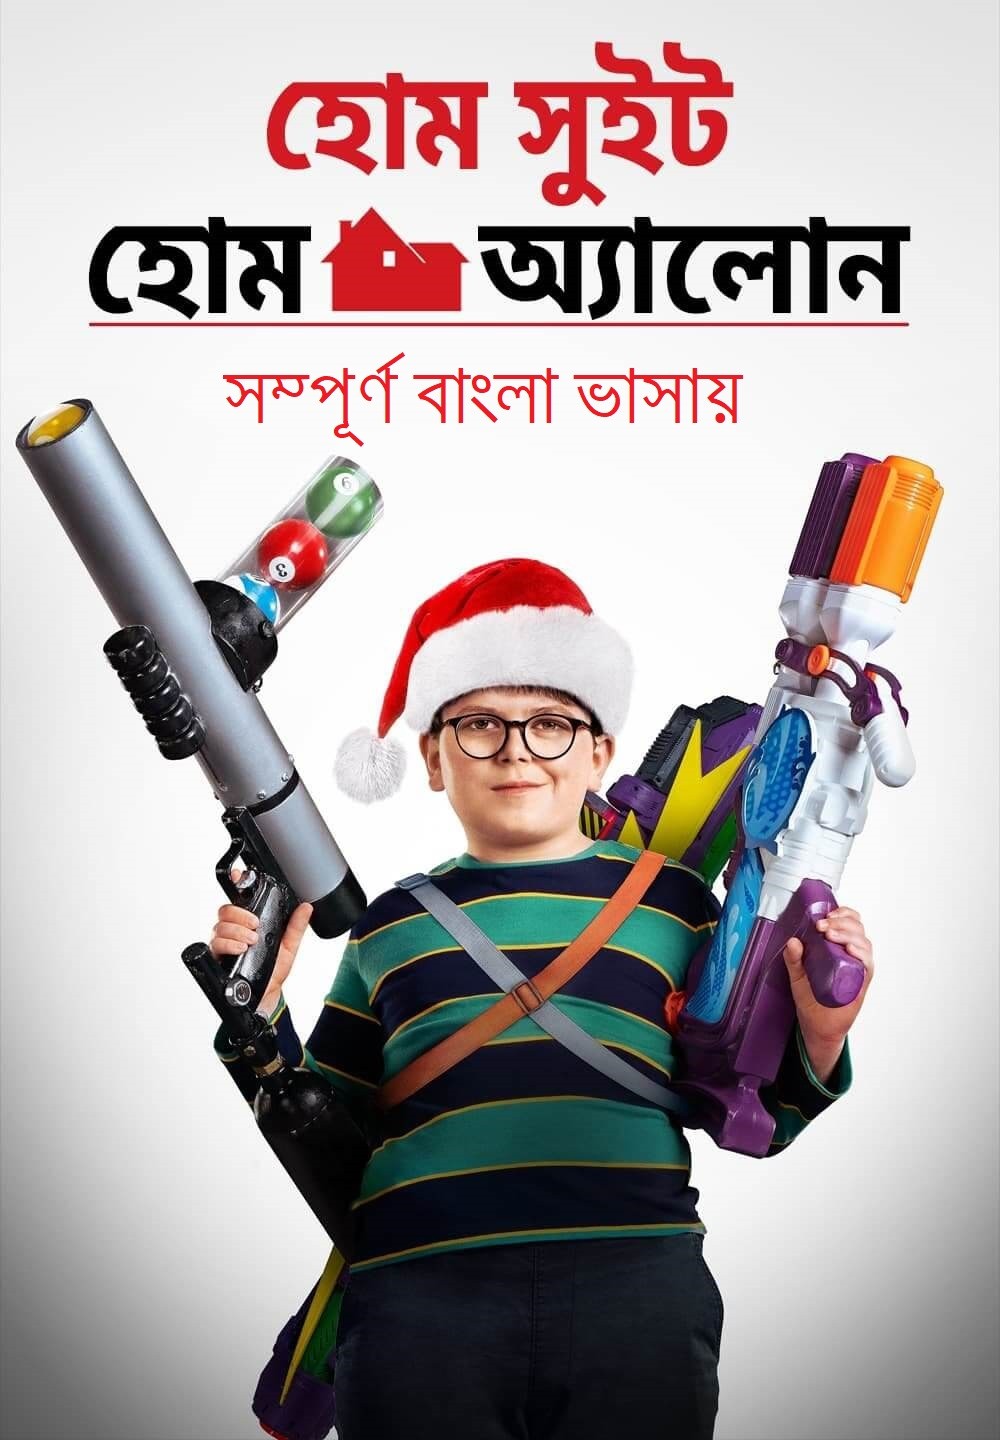 Home Sweet Home Alone 2022 Bengali Dubbed 720p HDRip 700MB Download